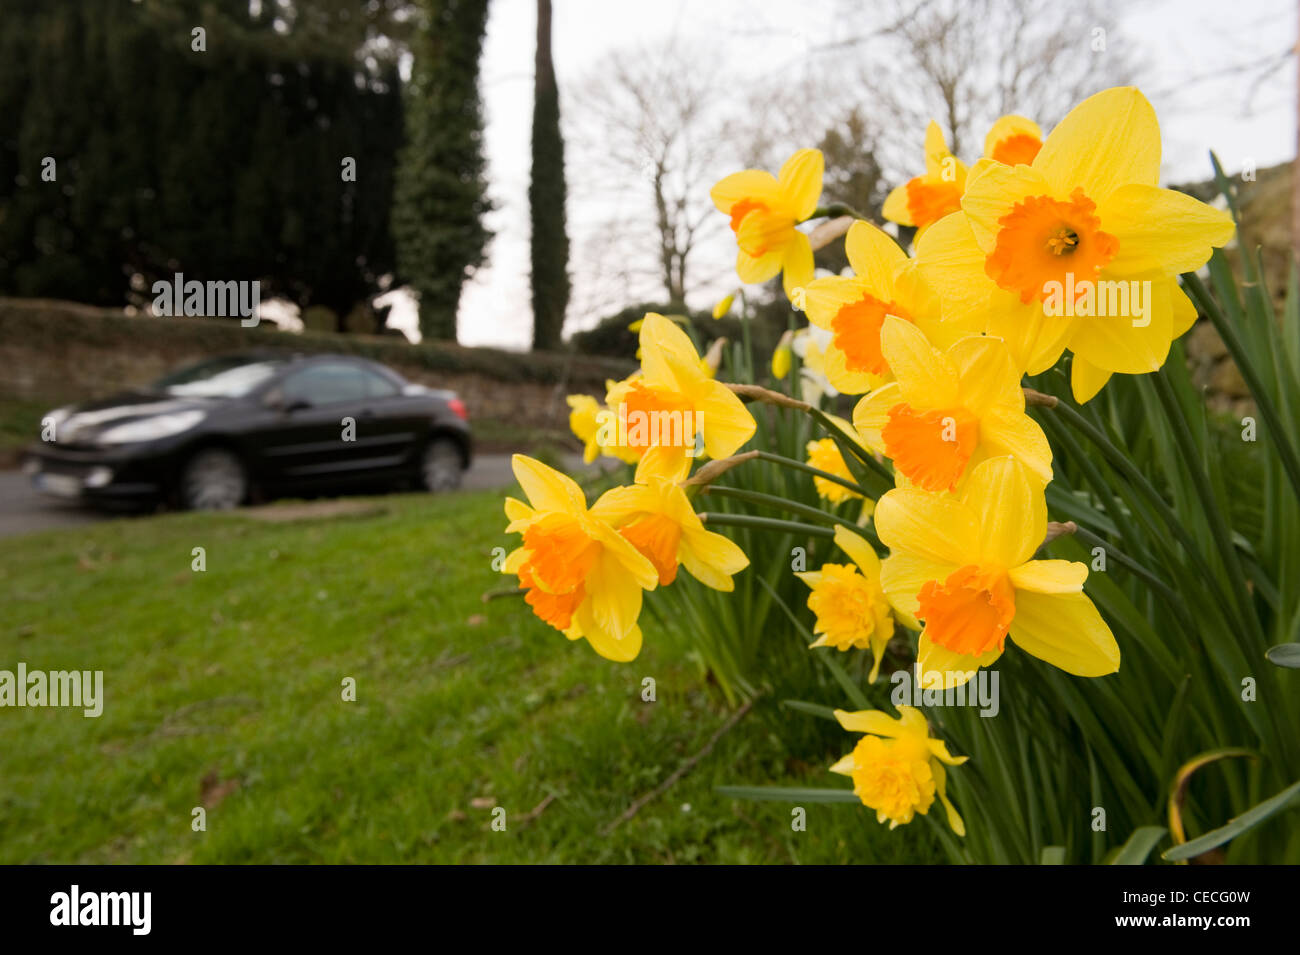 Bright colourful display of yellow orange spring flowers (beautiful flowering daffodils or narcissi) growing by road (& car) - Yorkshire, England, UK. Stock Photo